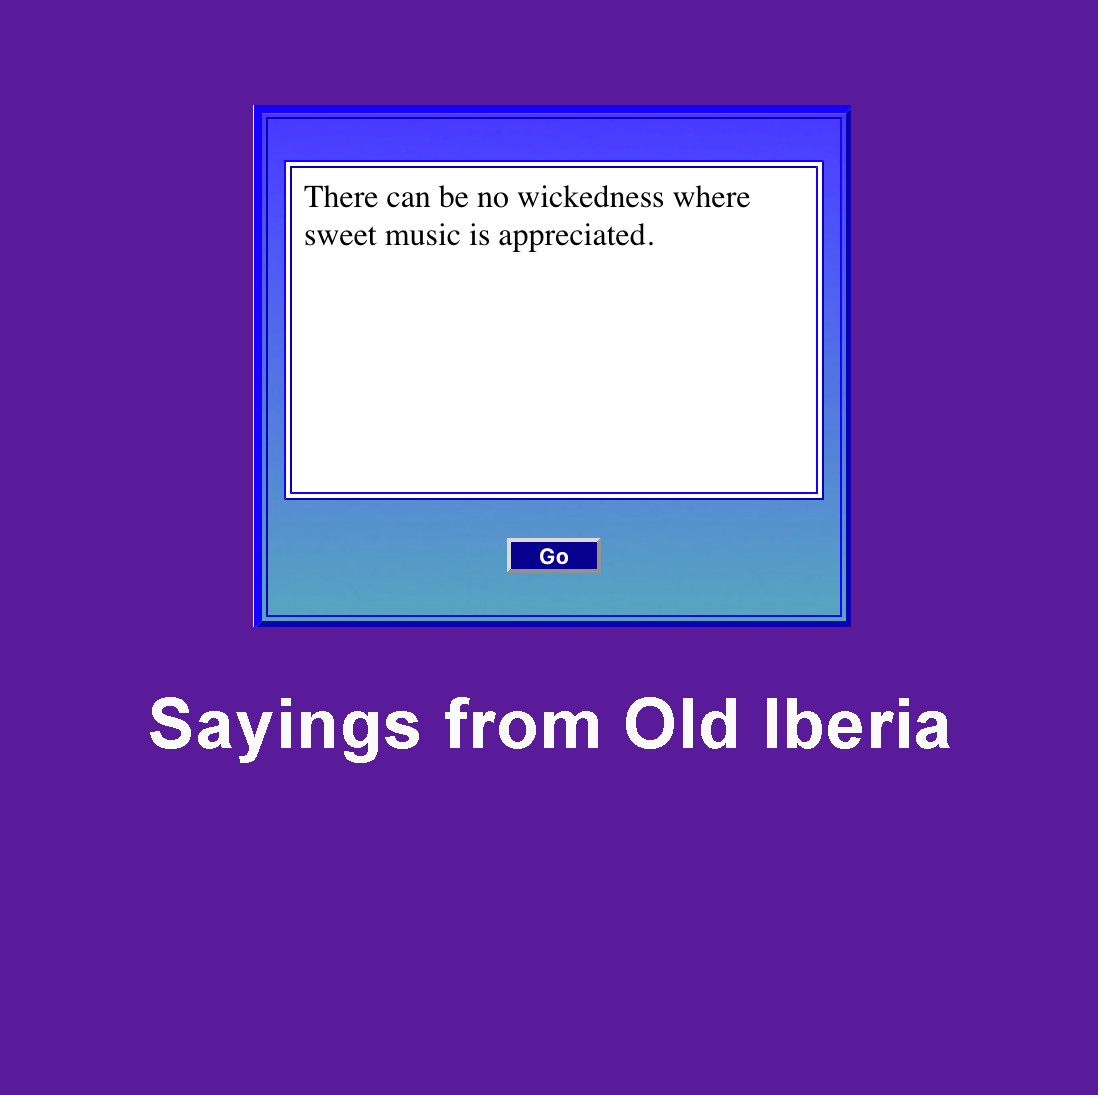 Crazy sayings from Old Iberia in this fun little pop-up at FreeSpeedReads.com/sayings-from-o… (#Iberia, #Spain, #EuropeanHistory, #history, #metaphor, #parable, #saying, #simile, #worldHistory, #language)